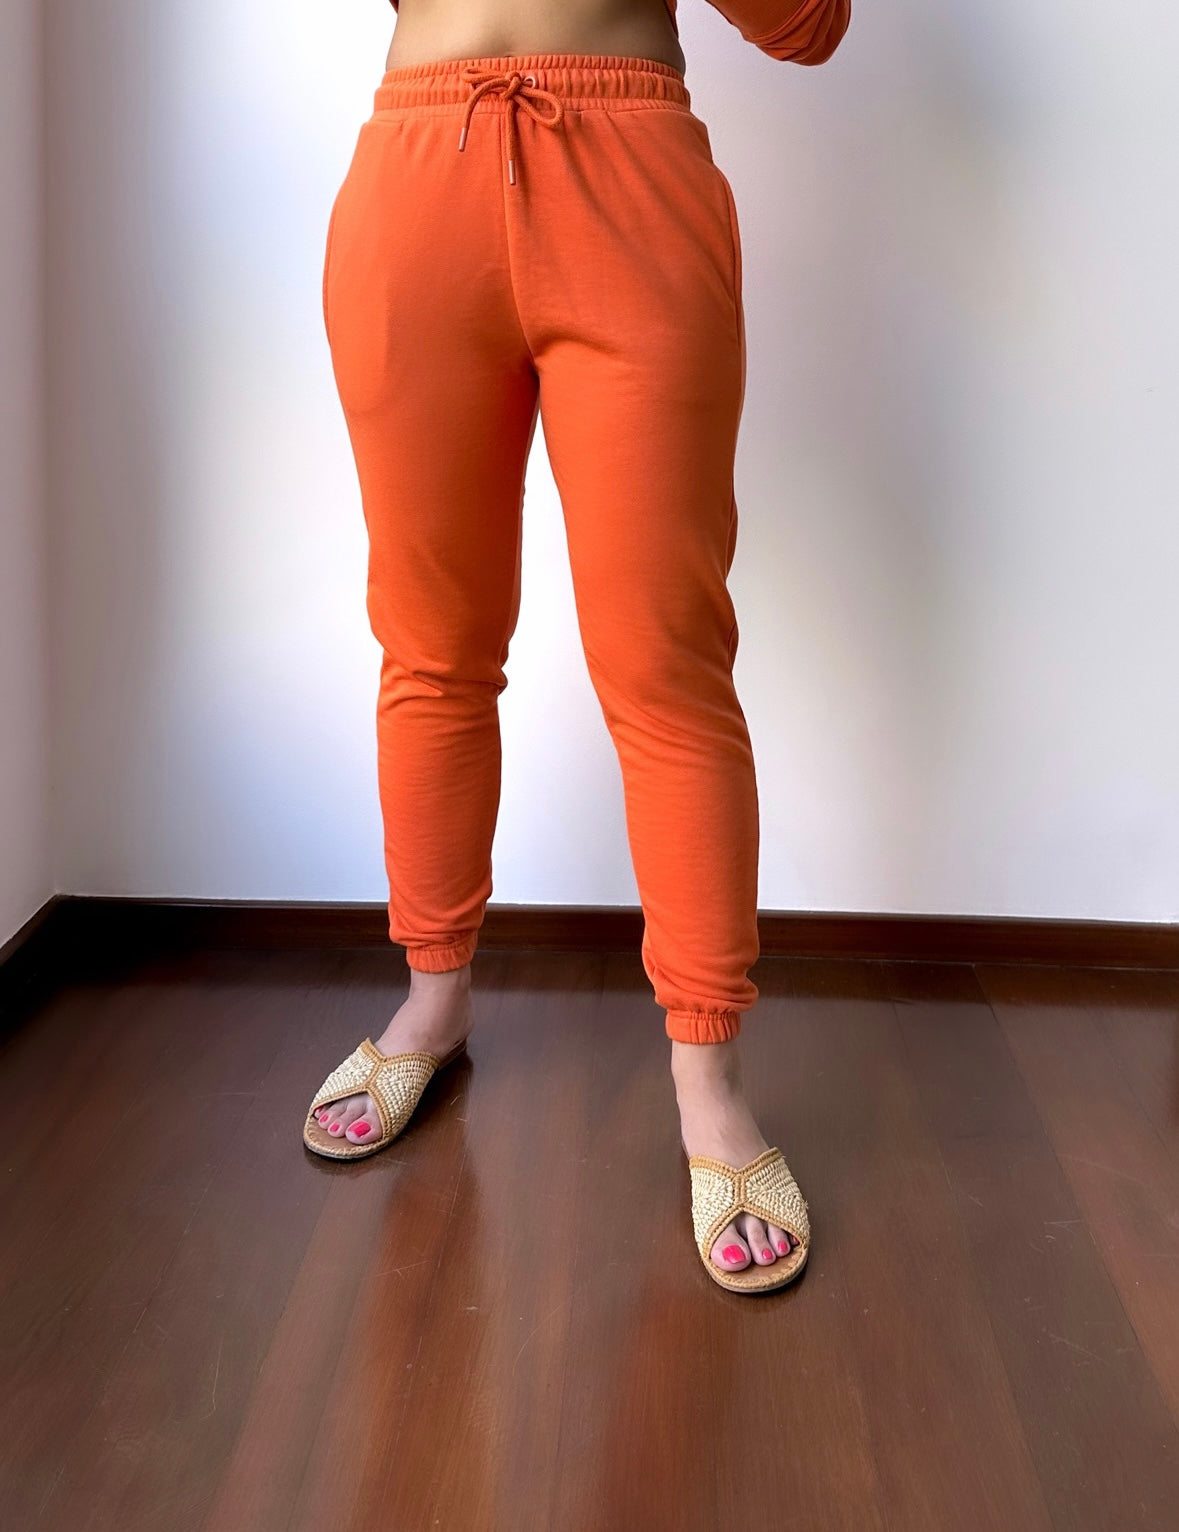 The Classic Sweatpants in Marmalade